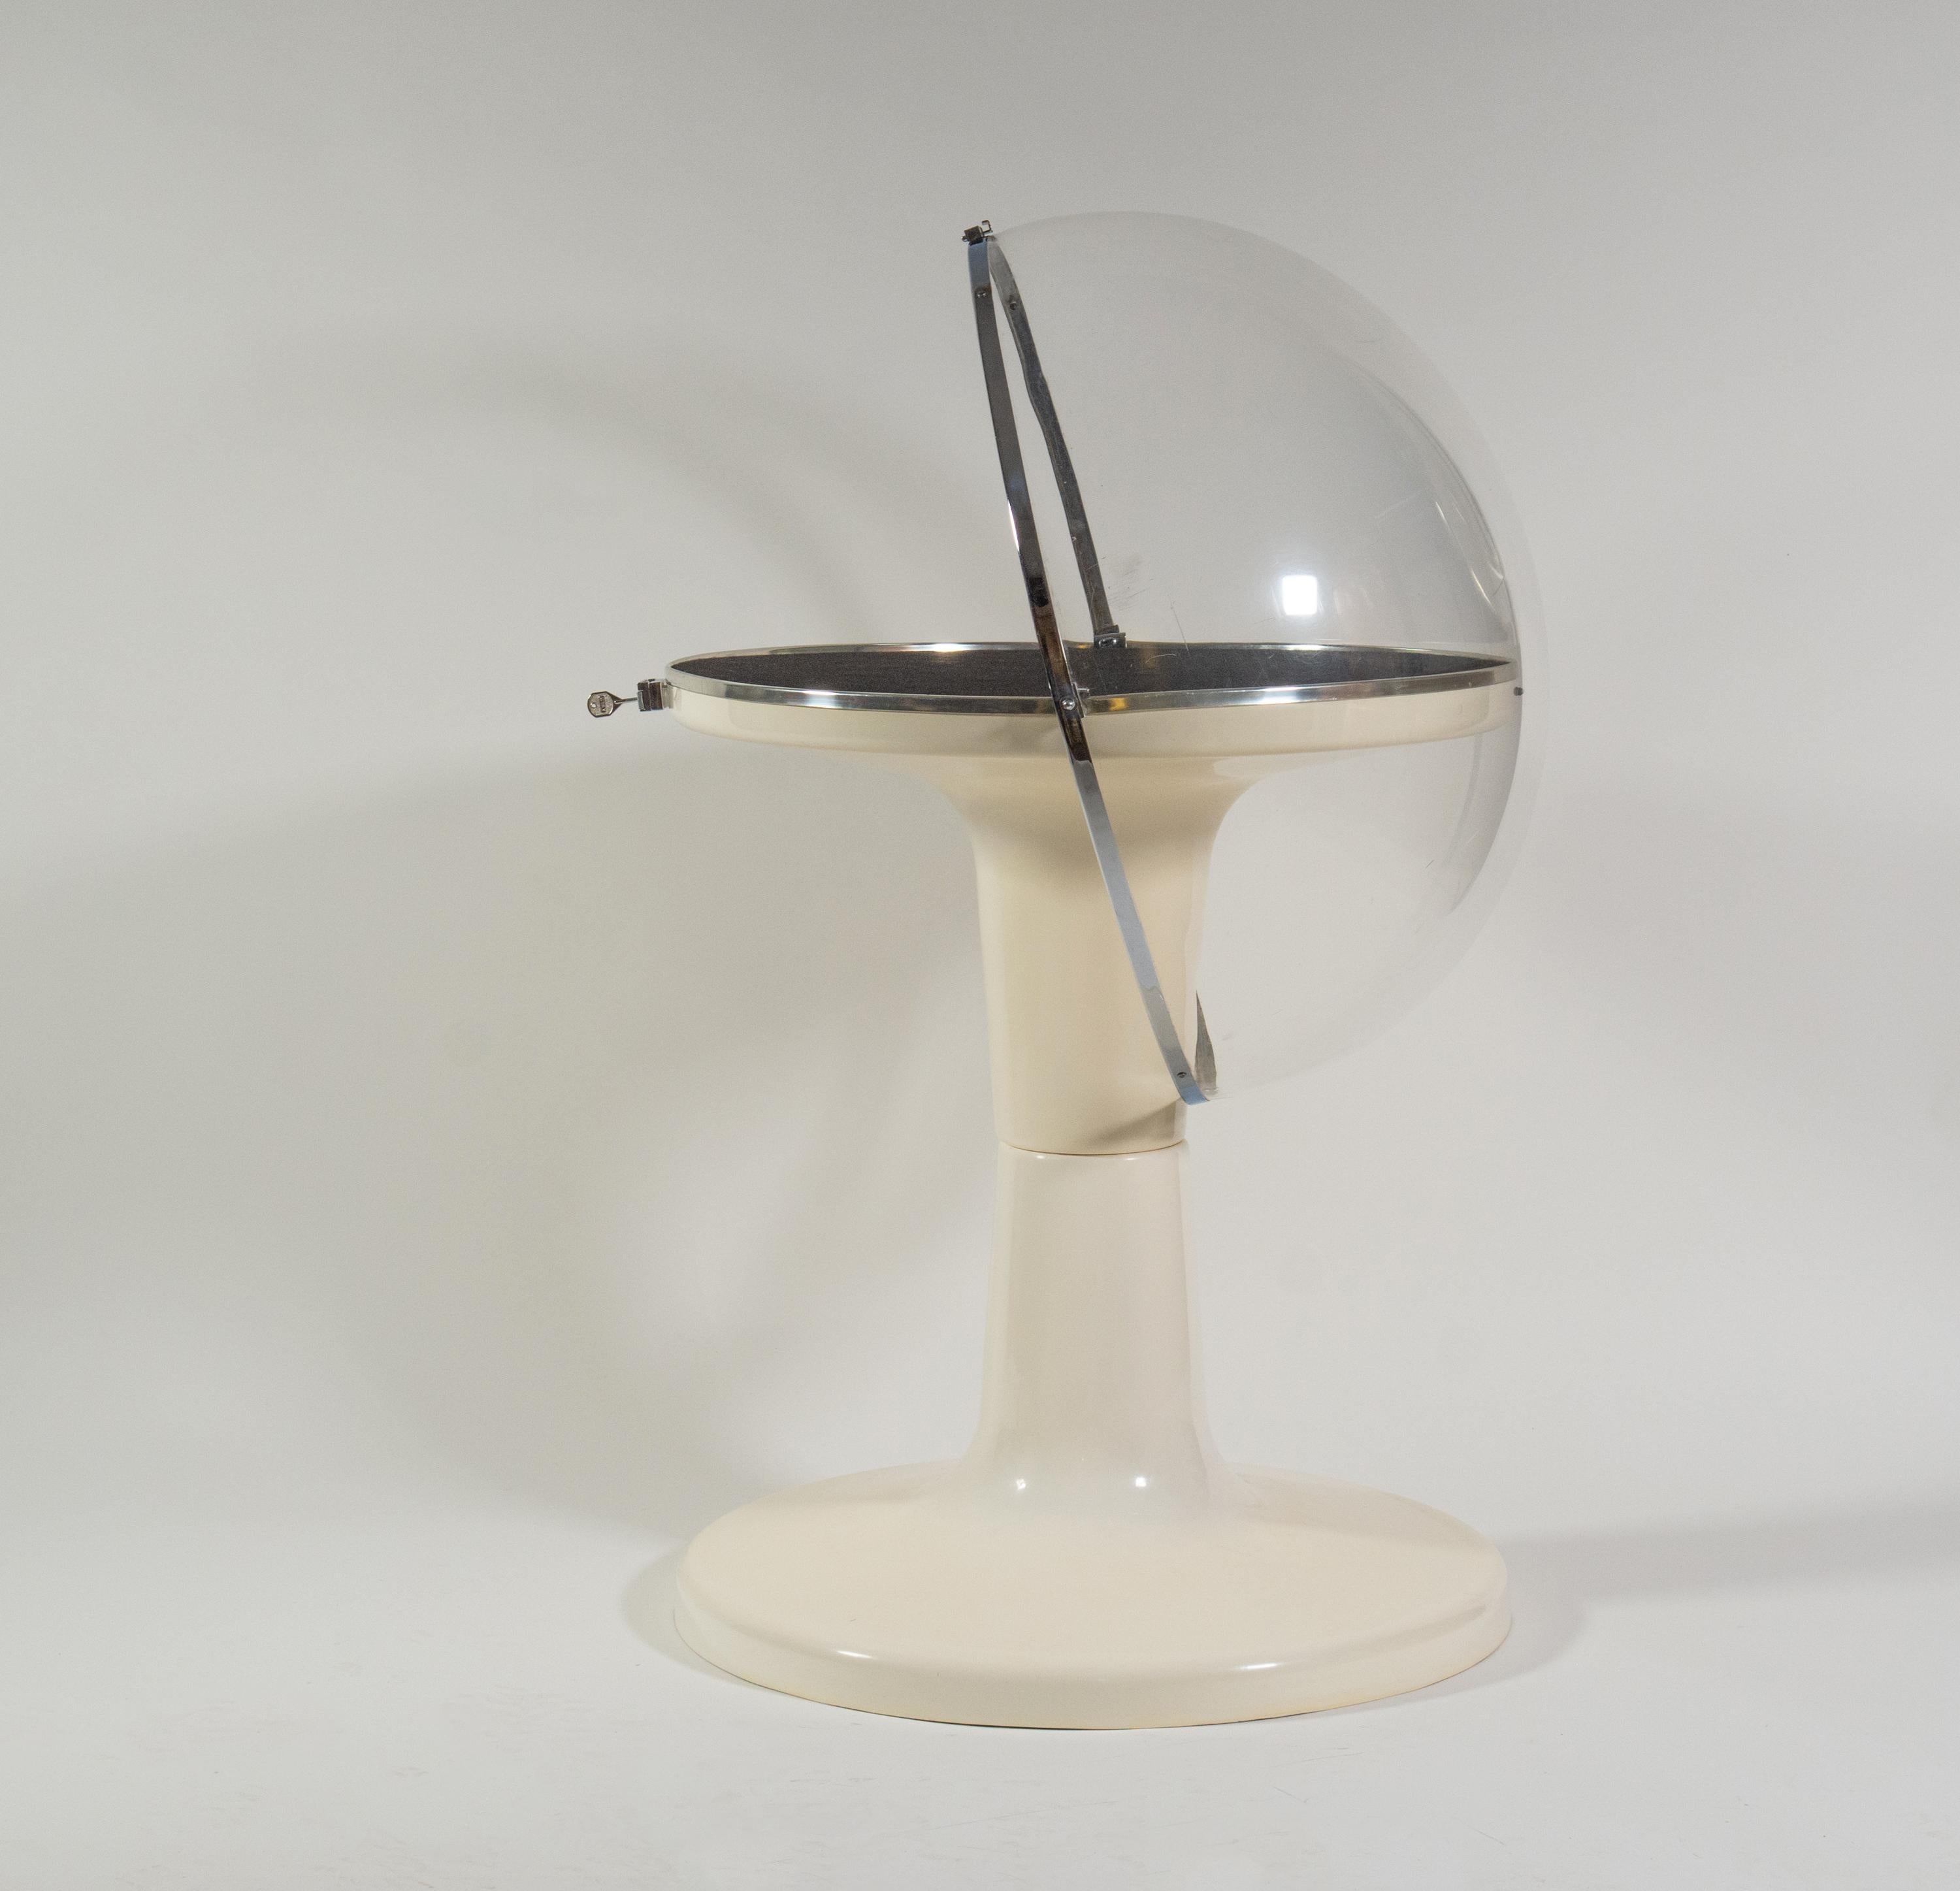 A fabulous Mid Century Space Age collectors display case. Circa late 1960s.

Previously from a collector's estate, a rarely seen item.

The display has a two part fibreglass tulip style base, with clear plastic dome lid, which has chromed edging.